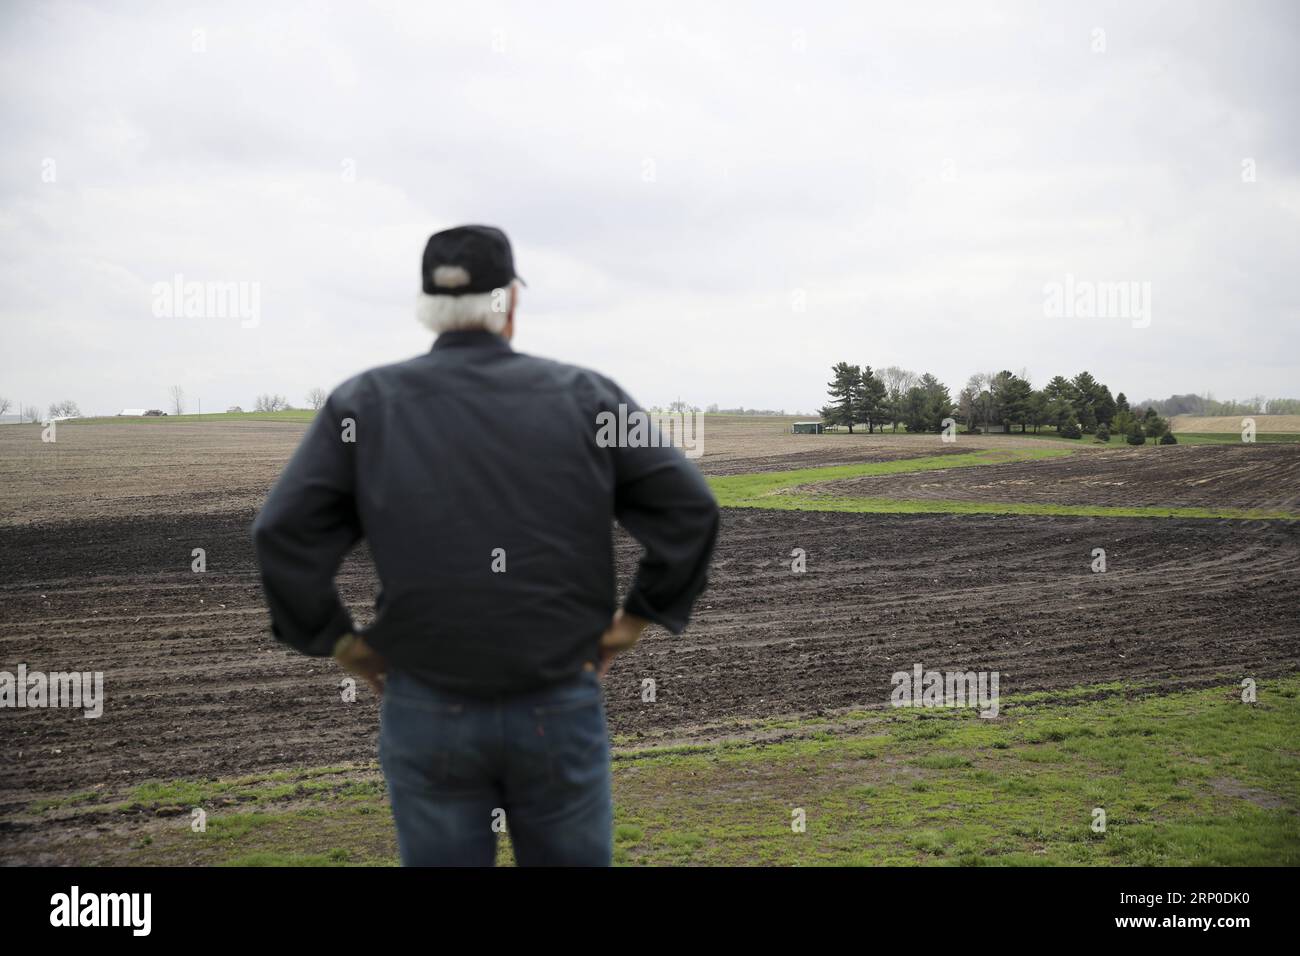 (180509) -- IOWA, May 9, 2018 -- Rick Kimberley looks at the field at his farm near Des Moines, capital of Iowa State, May 3, 2018. Rick and his son, Grant, grow more than 4,000 acres of corn and soybeans with a couple of hired hands and massive combines whose computers precisely track yield, moisture and other key statistics for each row and acre. He has been to China 15 times in recent years to talk about precision farming and other tricks of his trade, becoming an ambassador for modern farming methods in China. As for the current trade tensions between the United States and China, Rick said Stock Photo